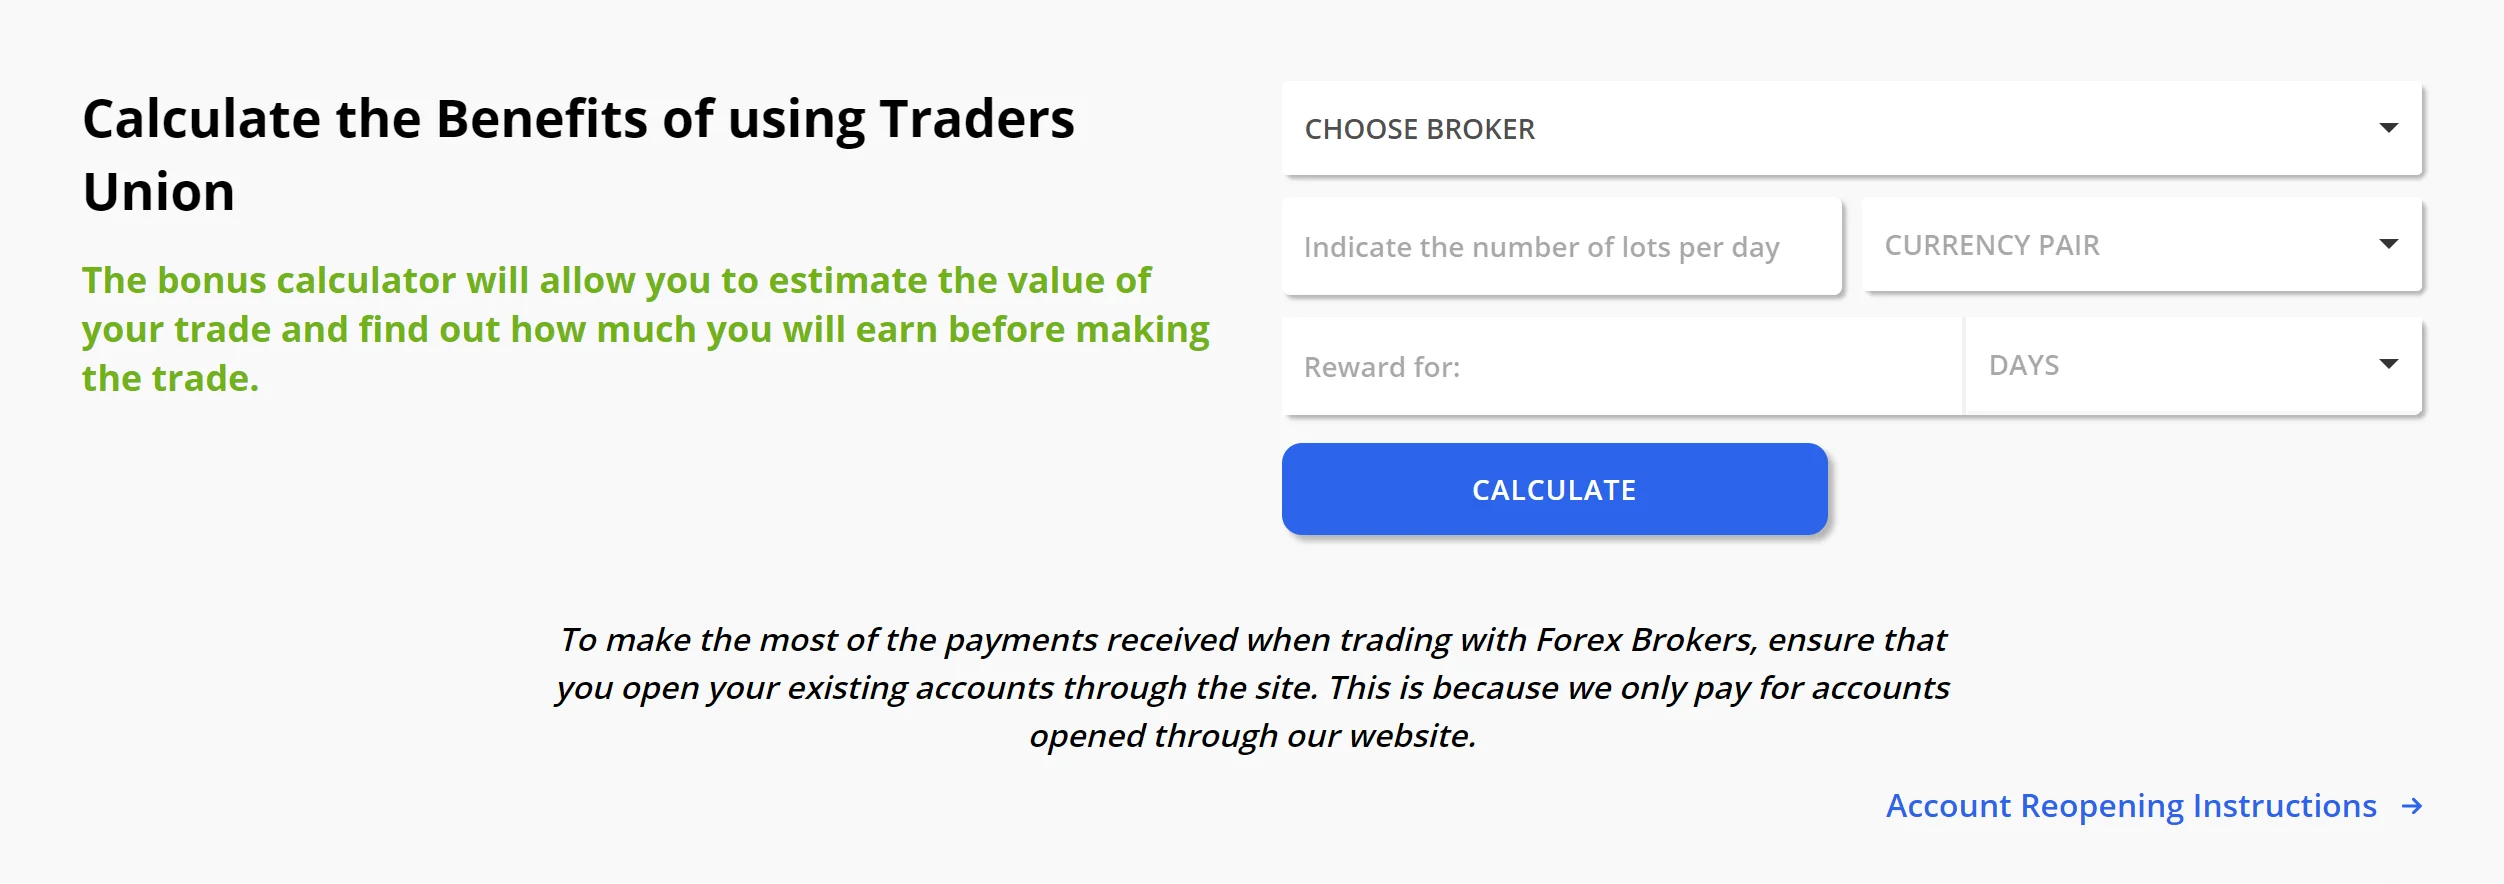 Select the broker, account type, and currency pair